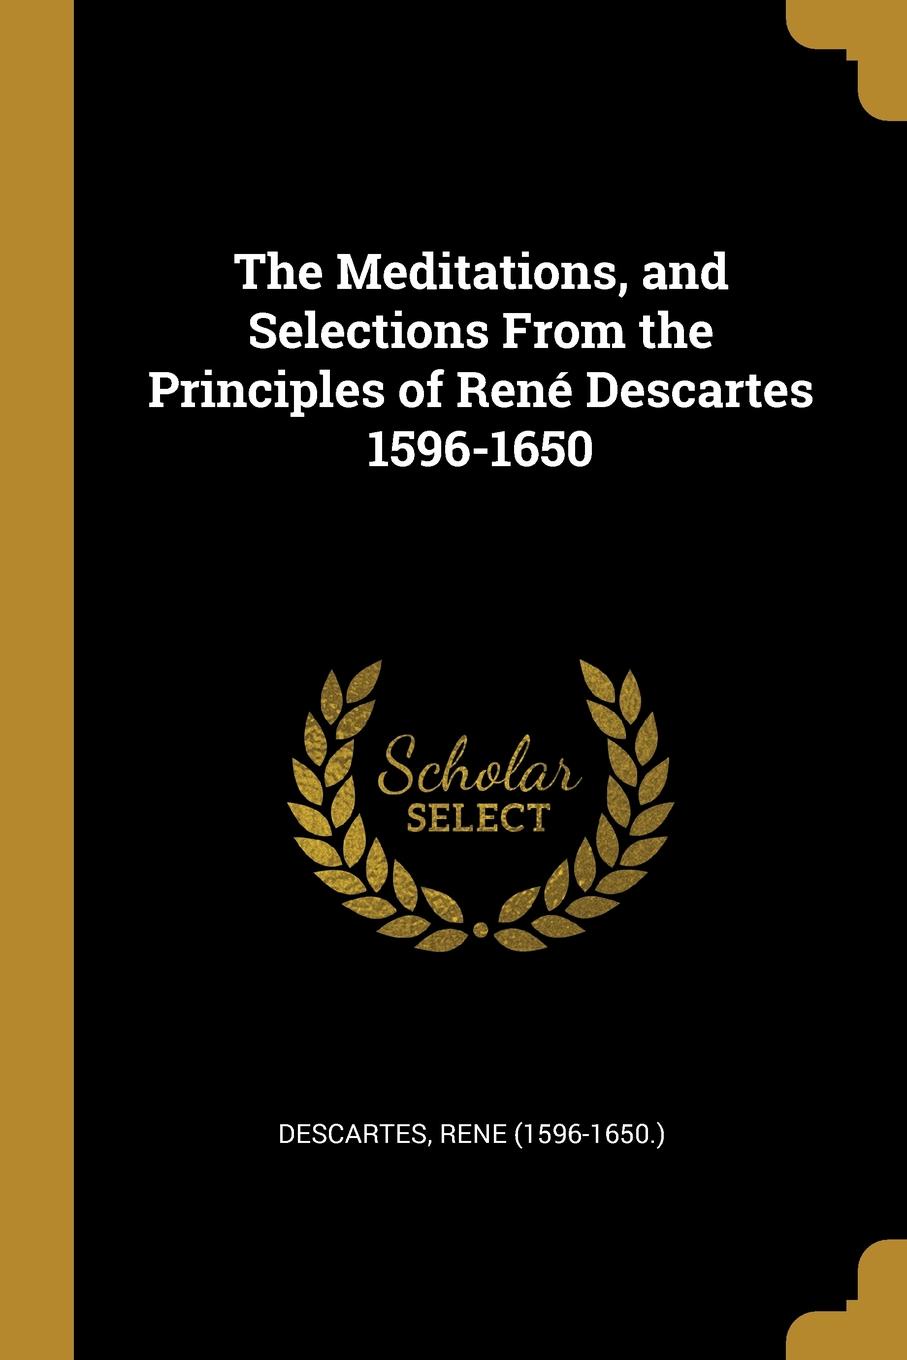 The Meditations, and Selections From the Principles of Rene Descartes 1596-1650